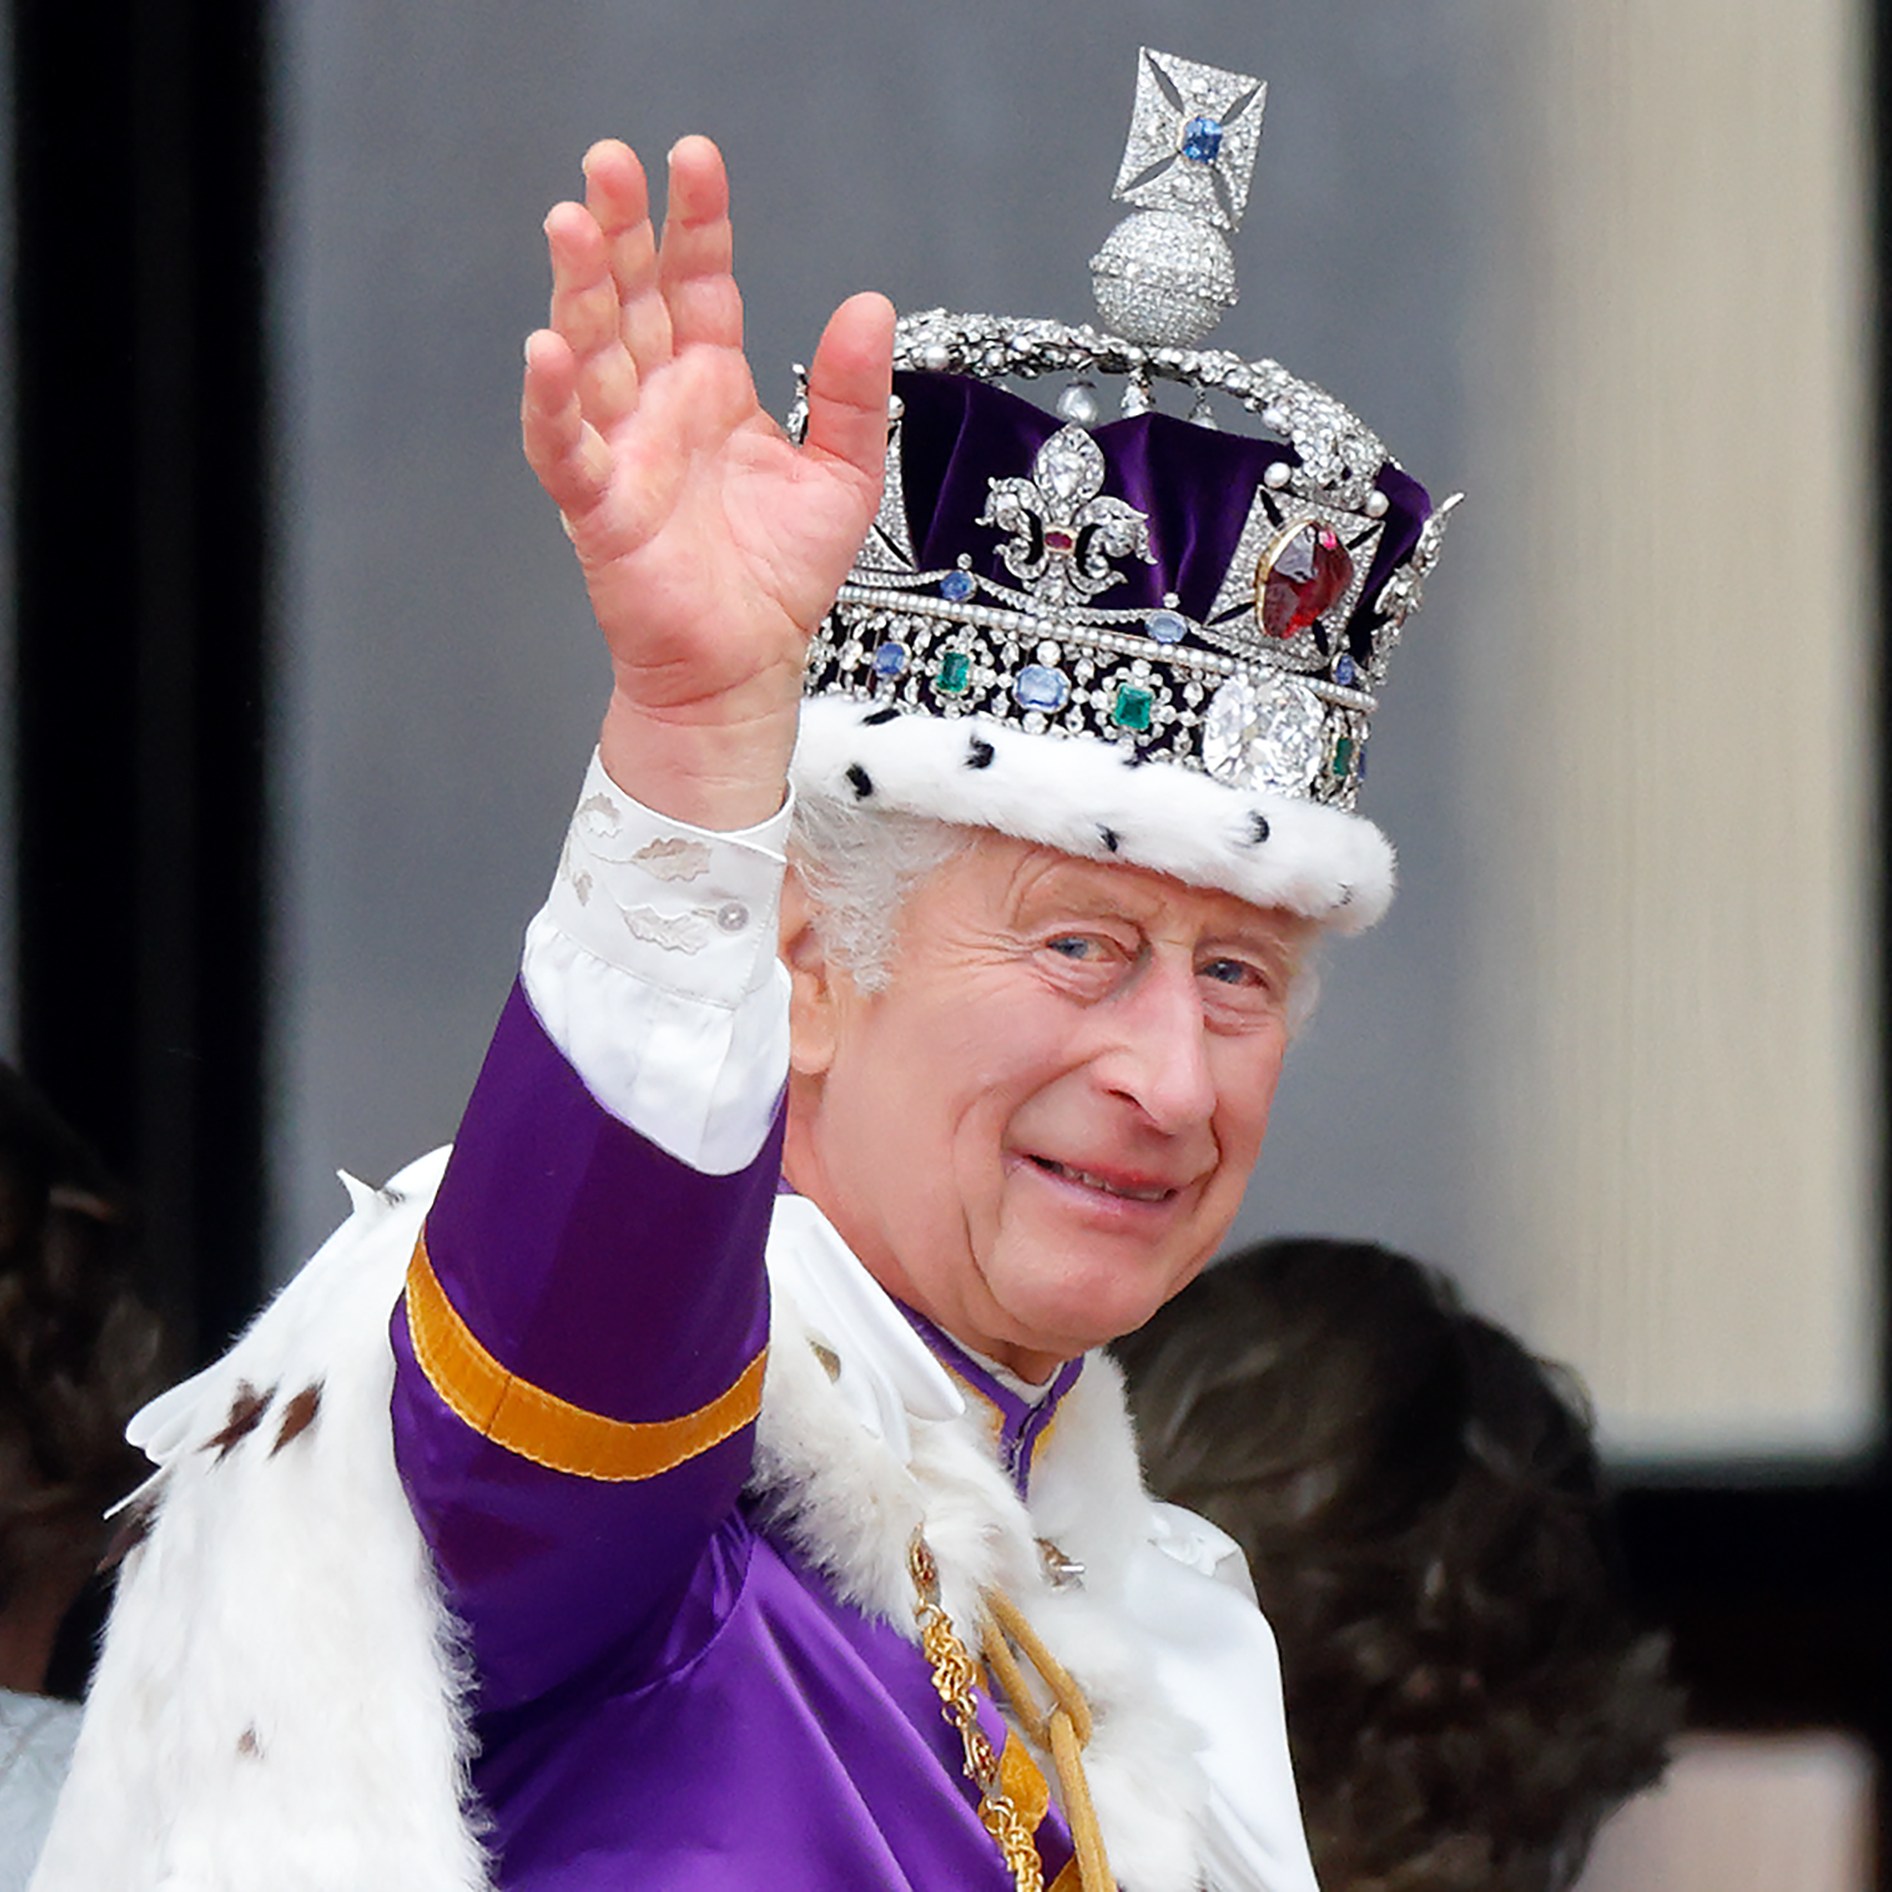 The King acceded to the throne on September 8, 2022 upon the death of his mother, with the coronation held at Westminster Abbey on May 6, 2023